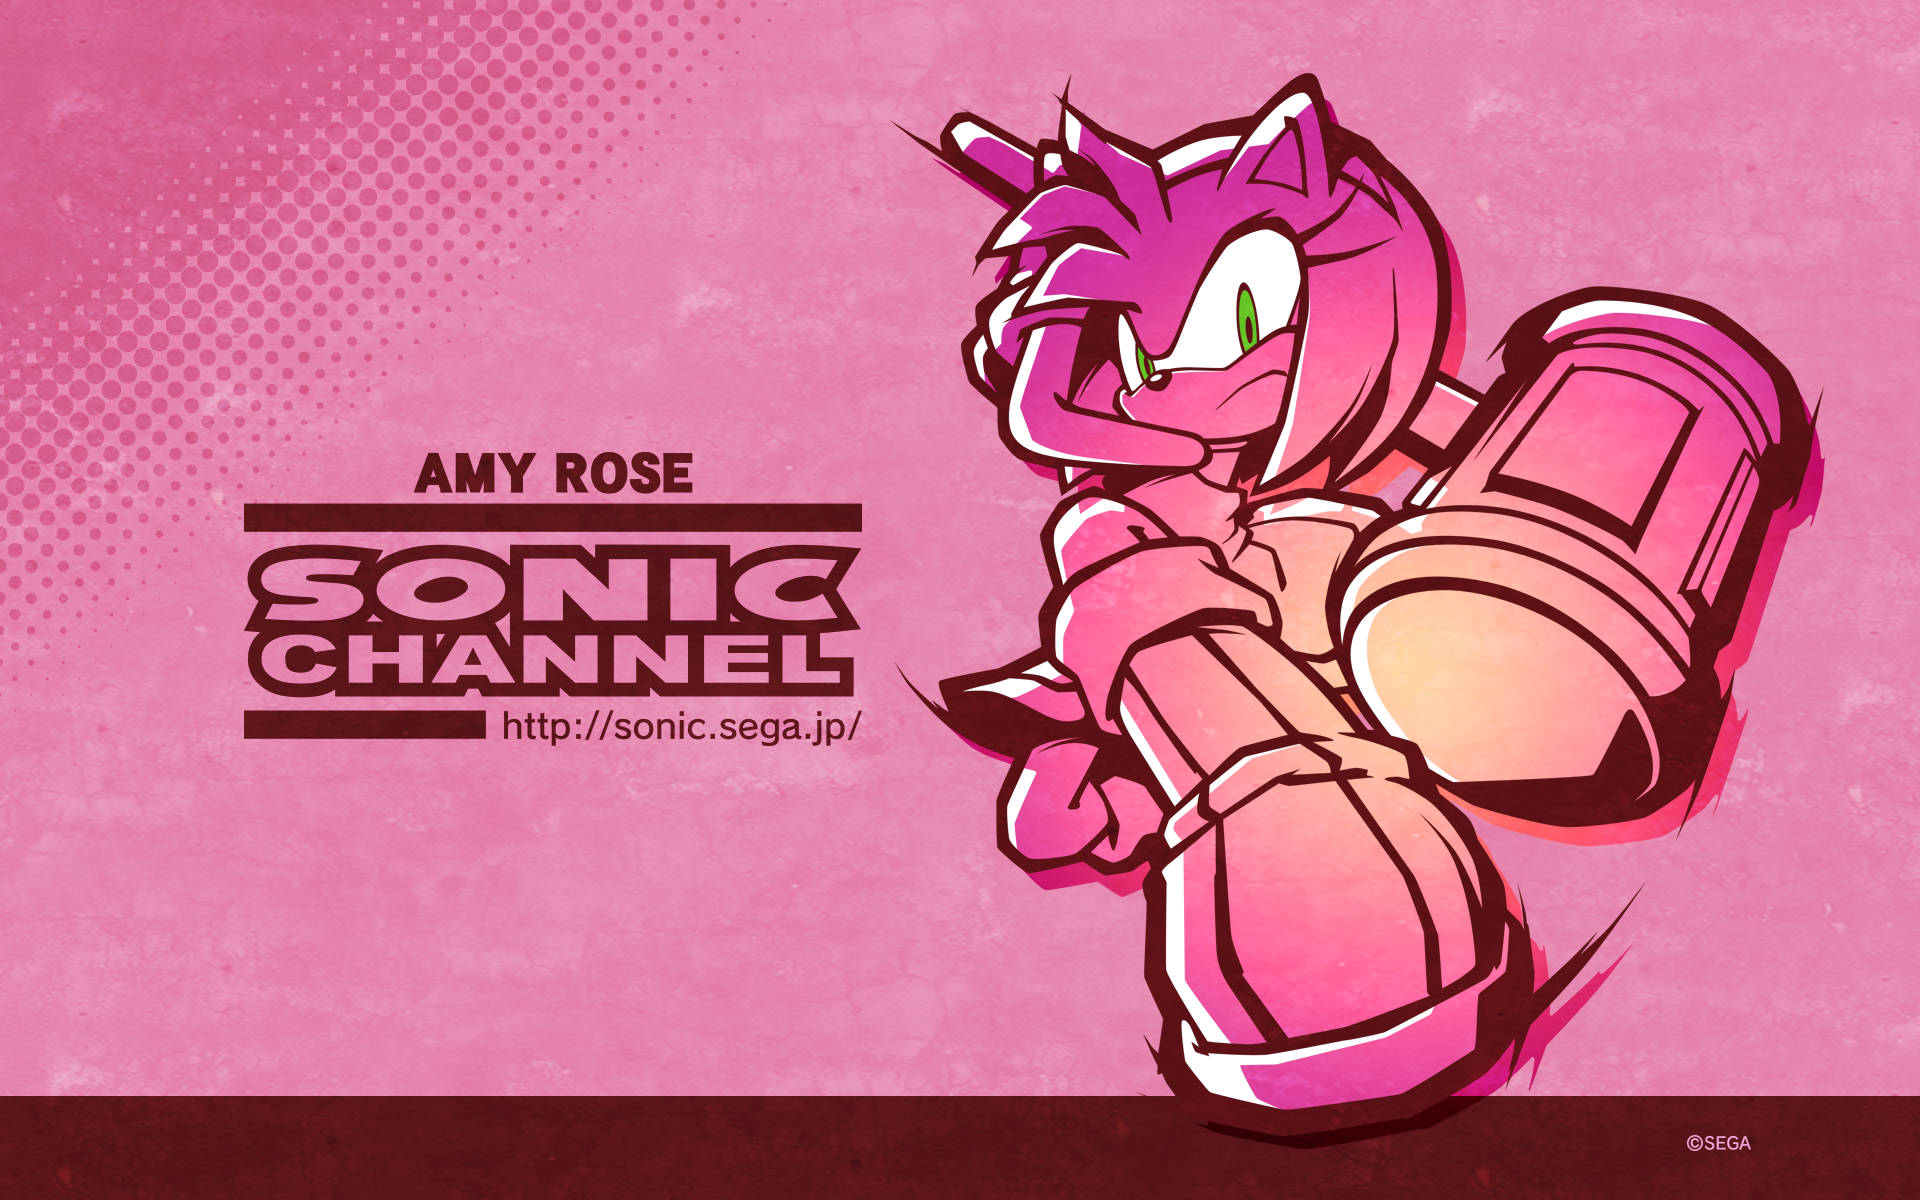 Amy Rose Pink Aesthetic